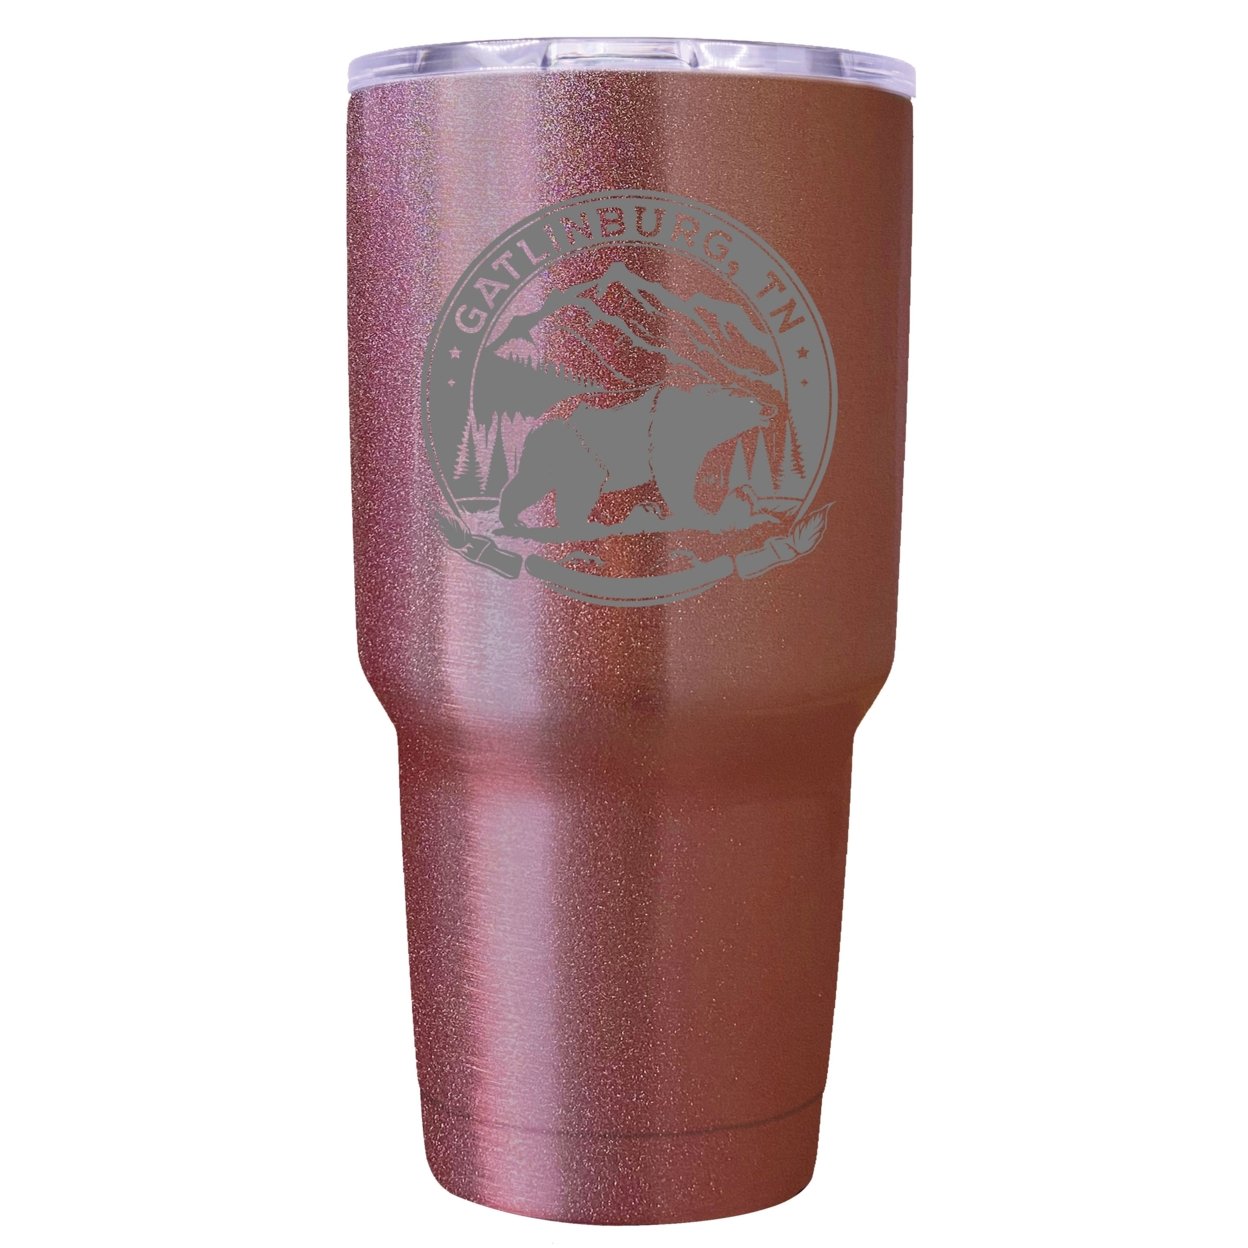 Gatlinburg Tennessee Laser Etched Souvenir 24 Oz Insulated Stainless Steel Tumbler - Rose Gold